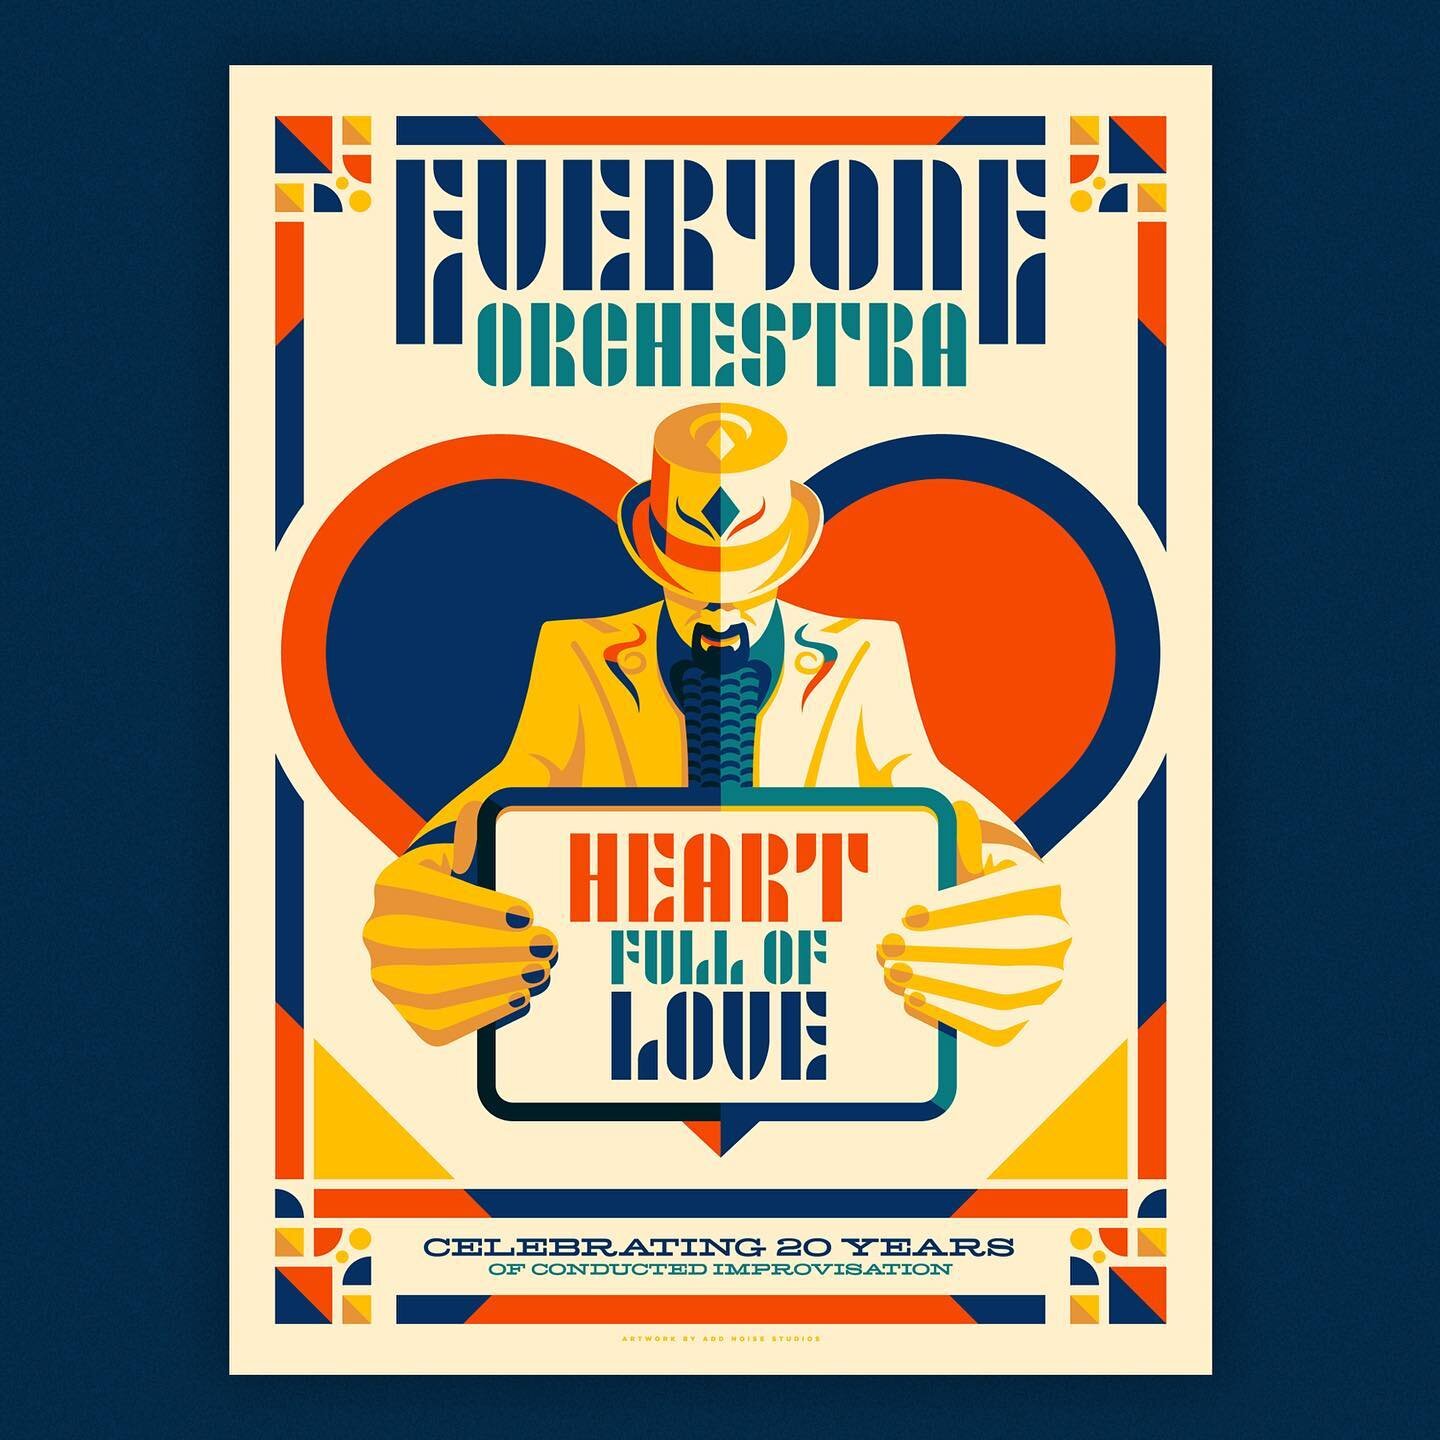 #tbt 20 year anniversary artwork for @everyoneorchestra Throwing it it back to the very beginning of the year, which feels like a really long time ago (but also not that long ago). It was a pleasure working with Matt on this one to find something wit